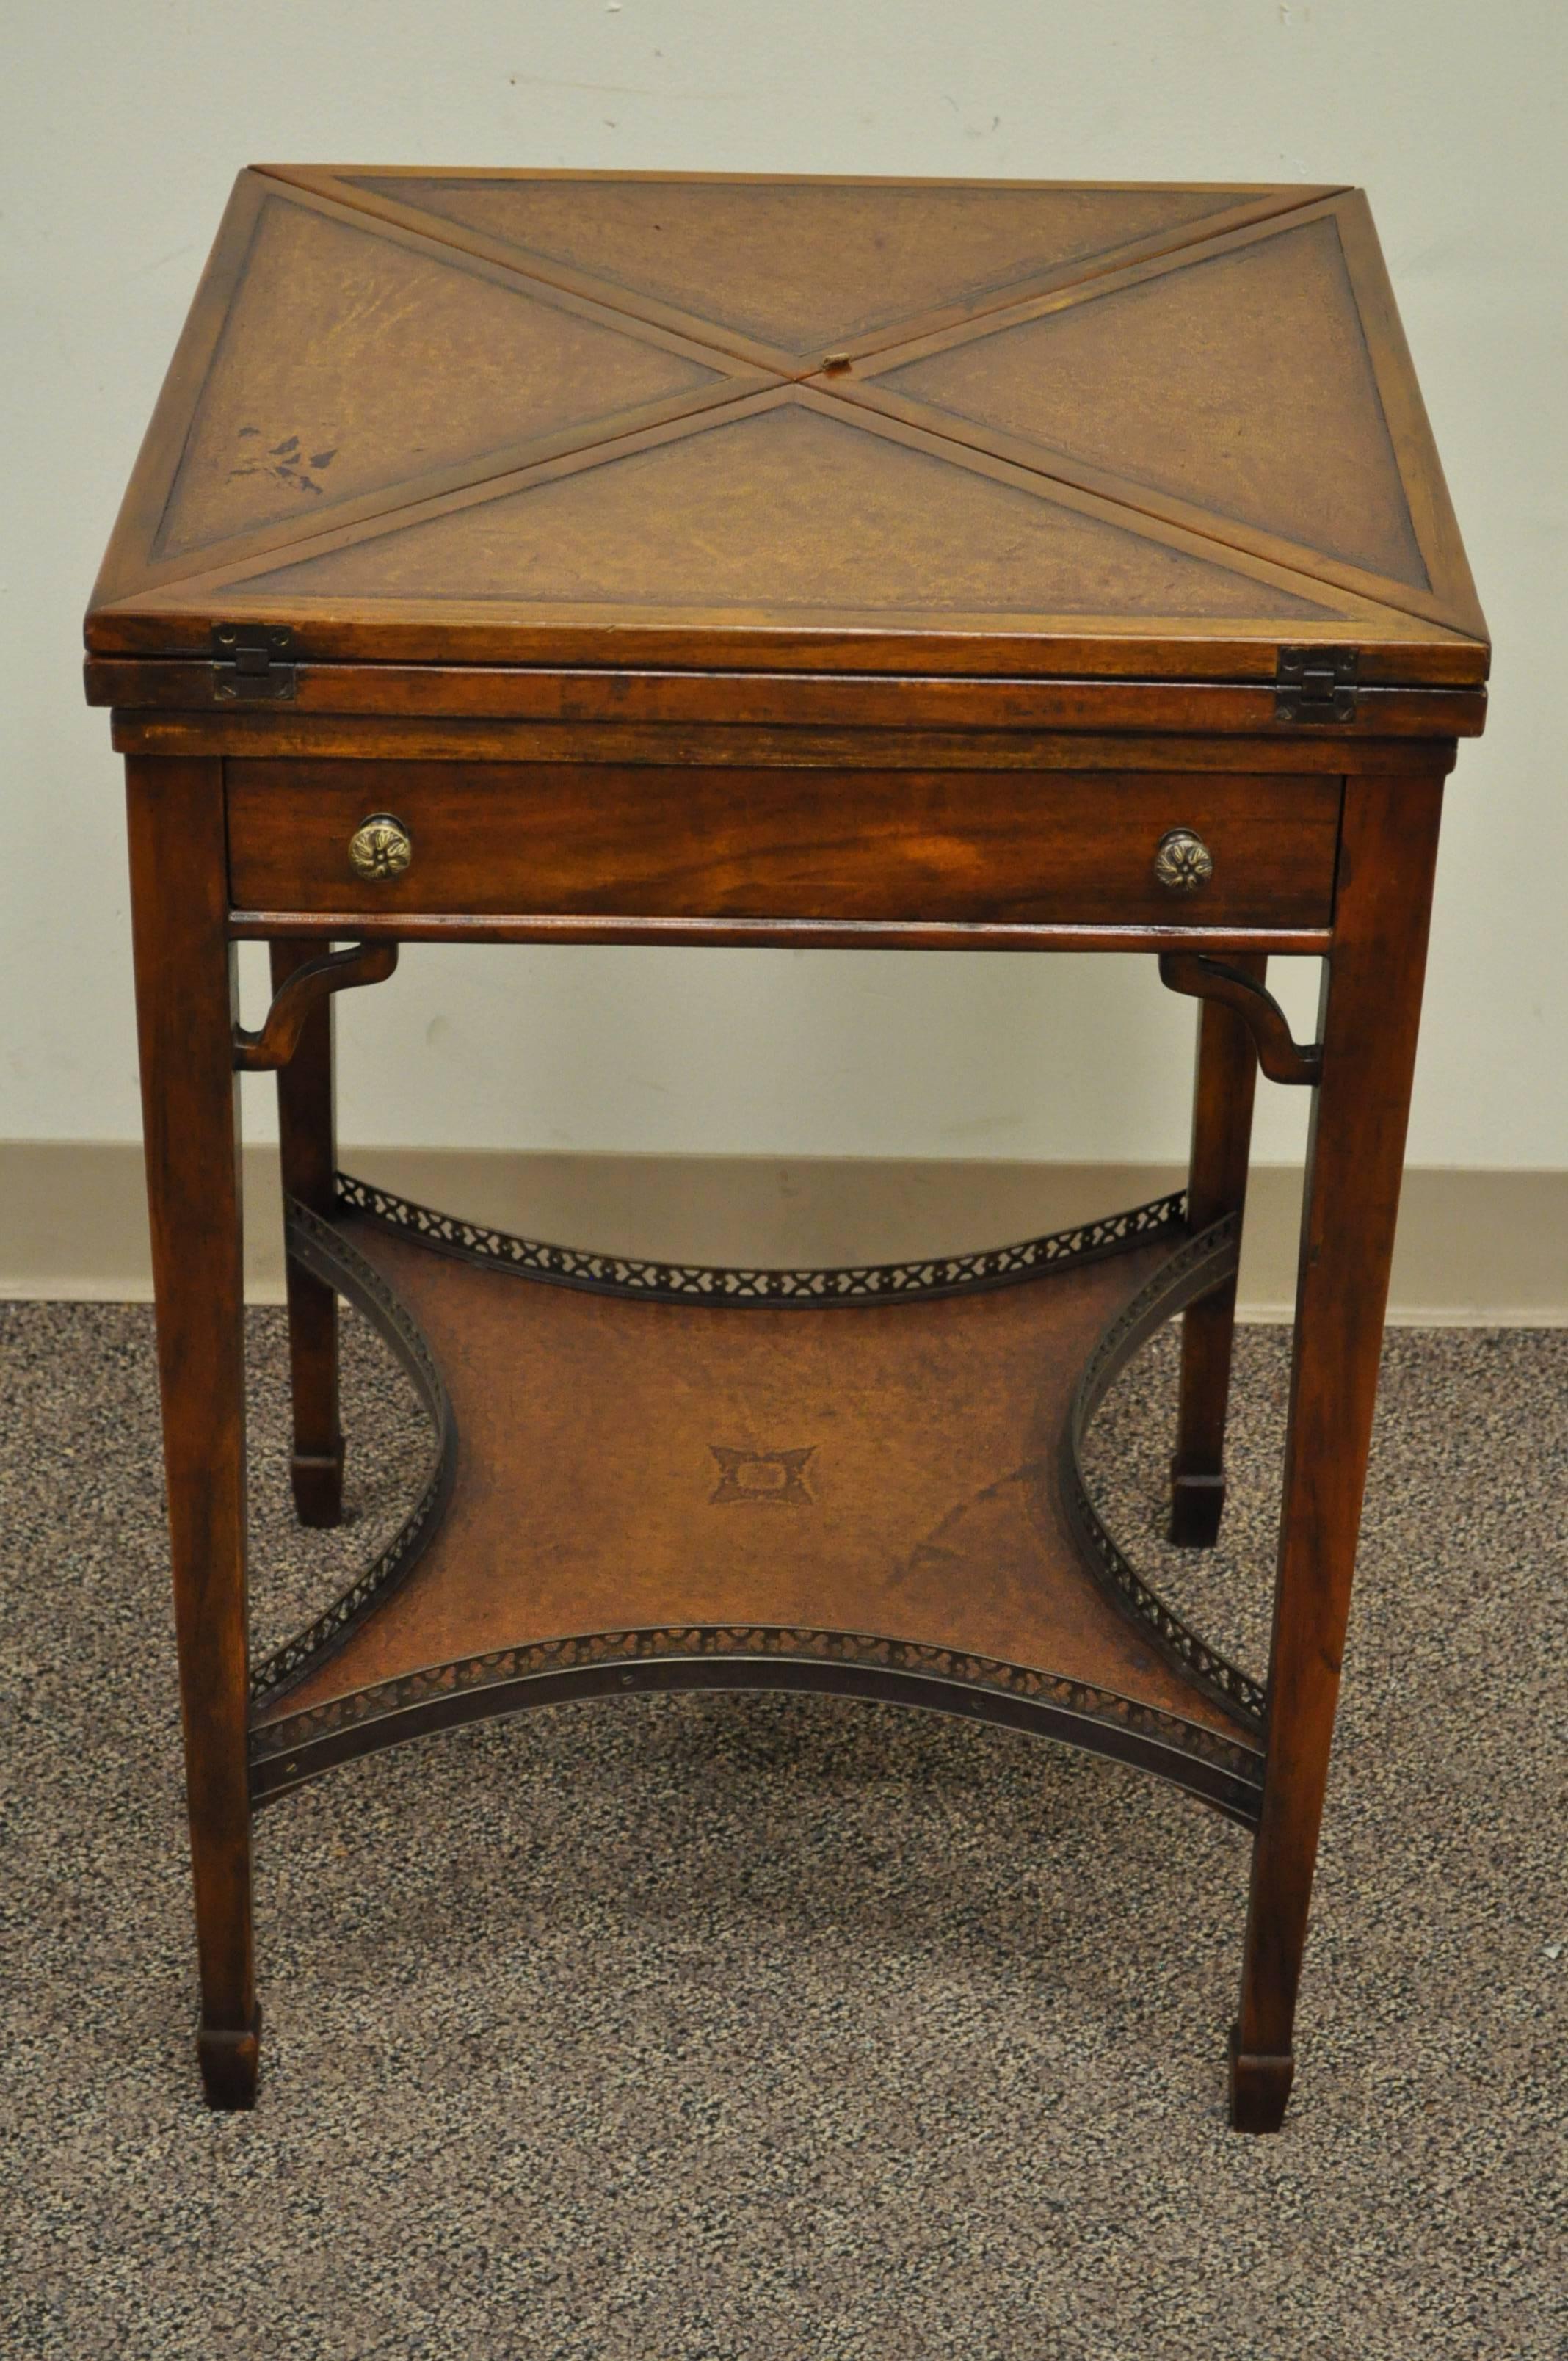 High quality, early 20th century, English game table. Item features a tooled leather top with napkin folding corners which exposes the tooled leather game table surface. Lower section features a tooled leather surface and brass gallery. Single